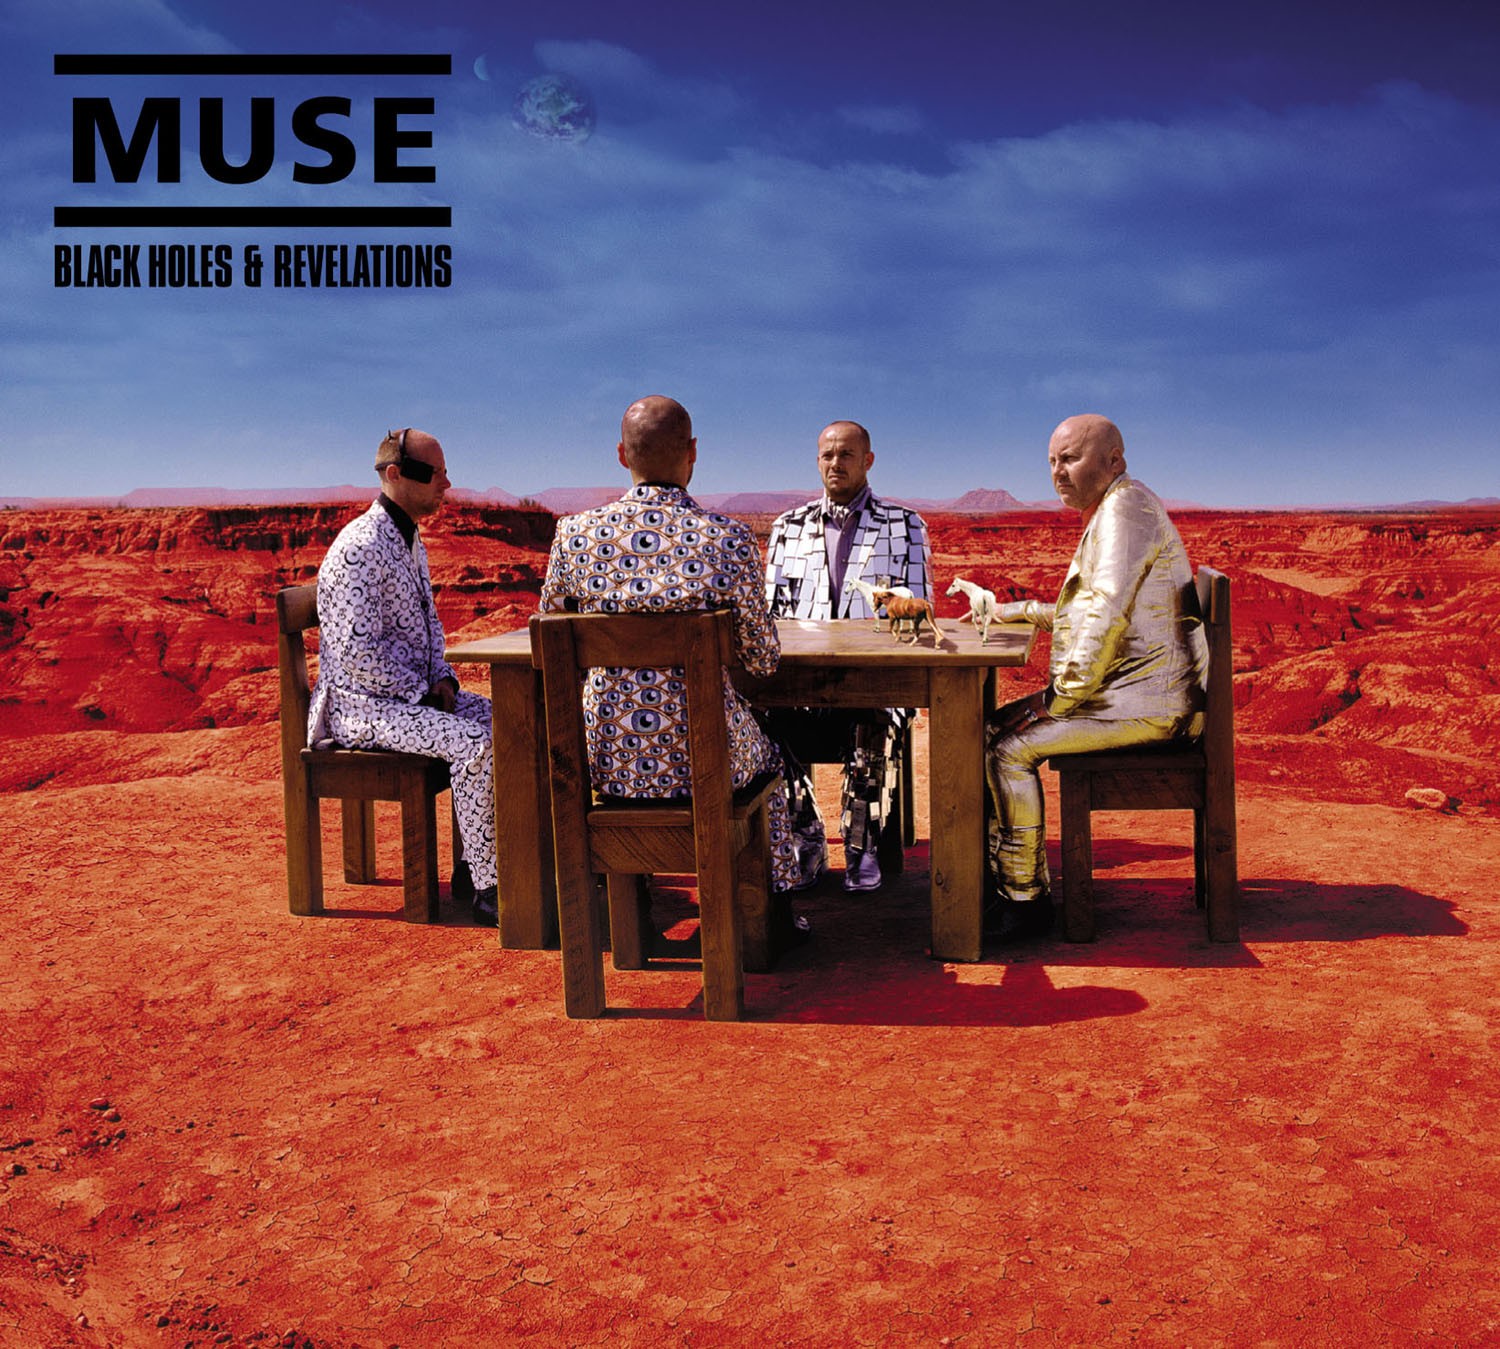 General 1500x1349 men sitting outdoors music album covers Muse  band